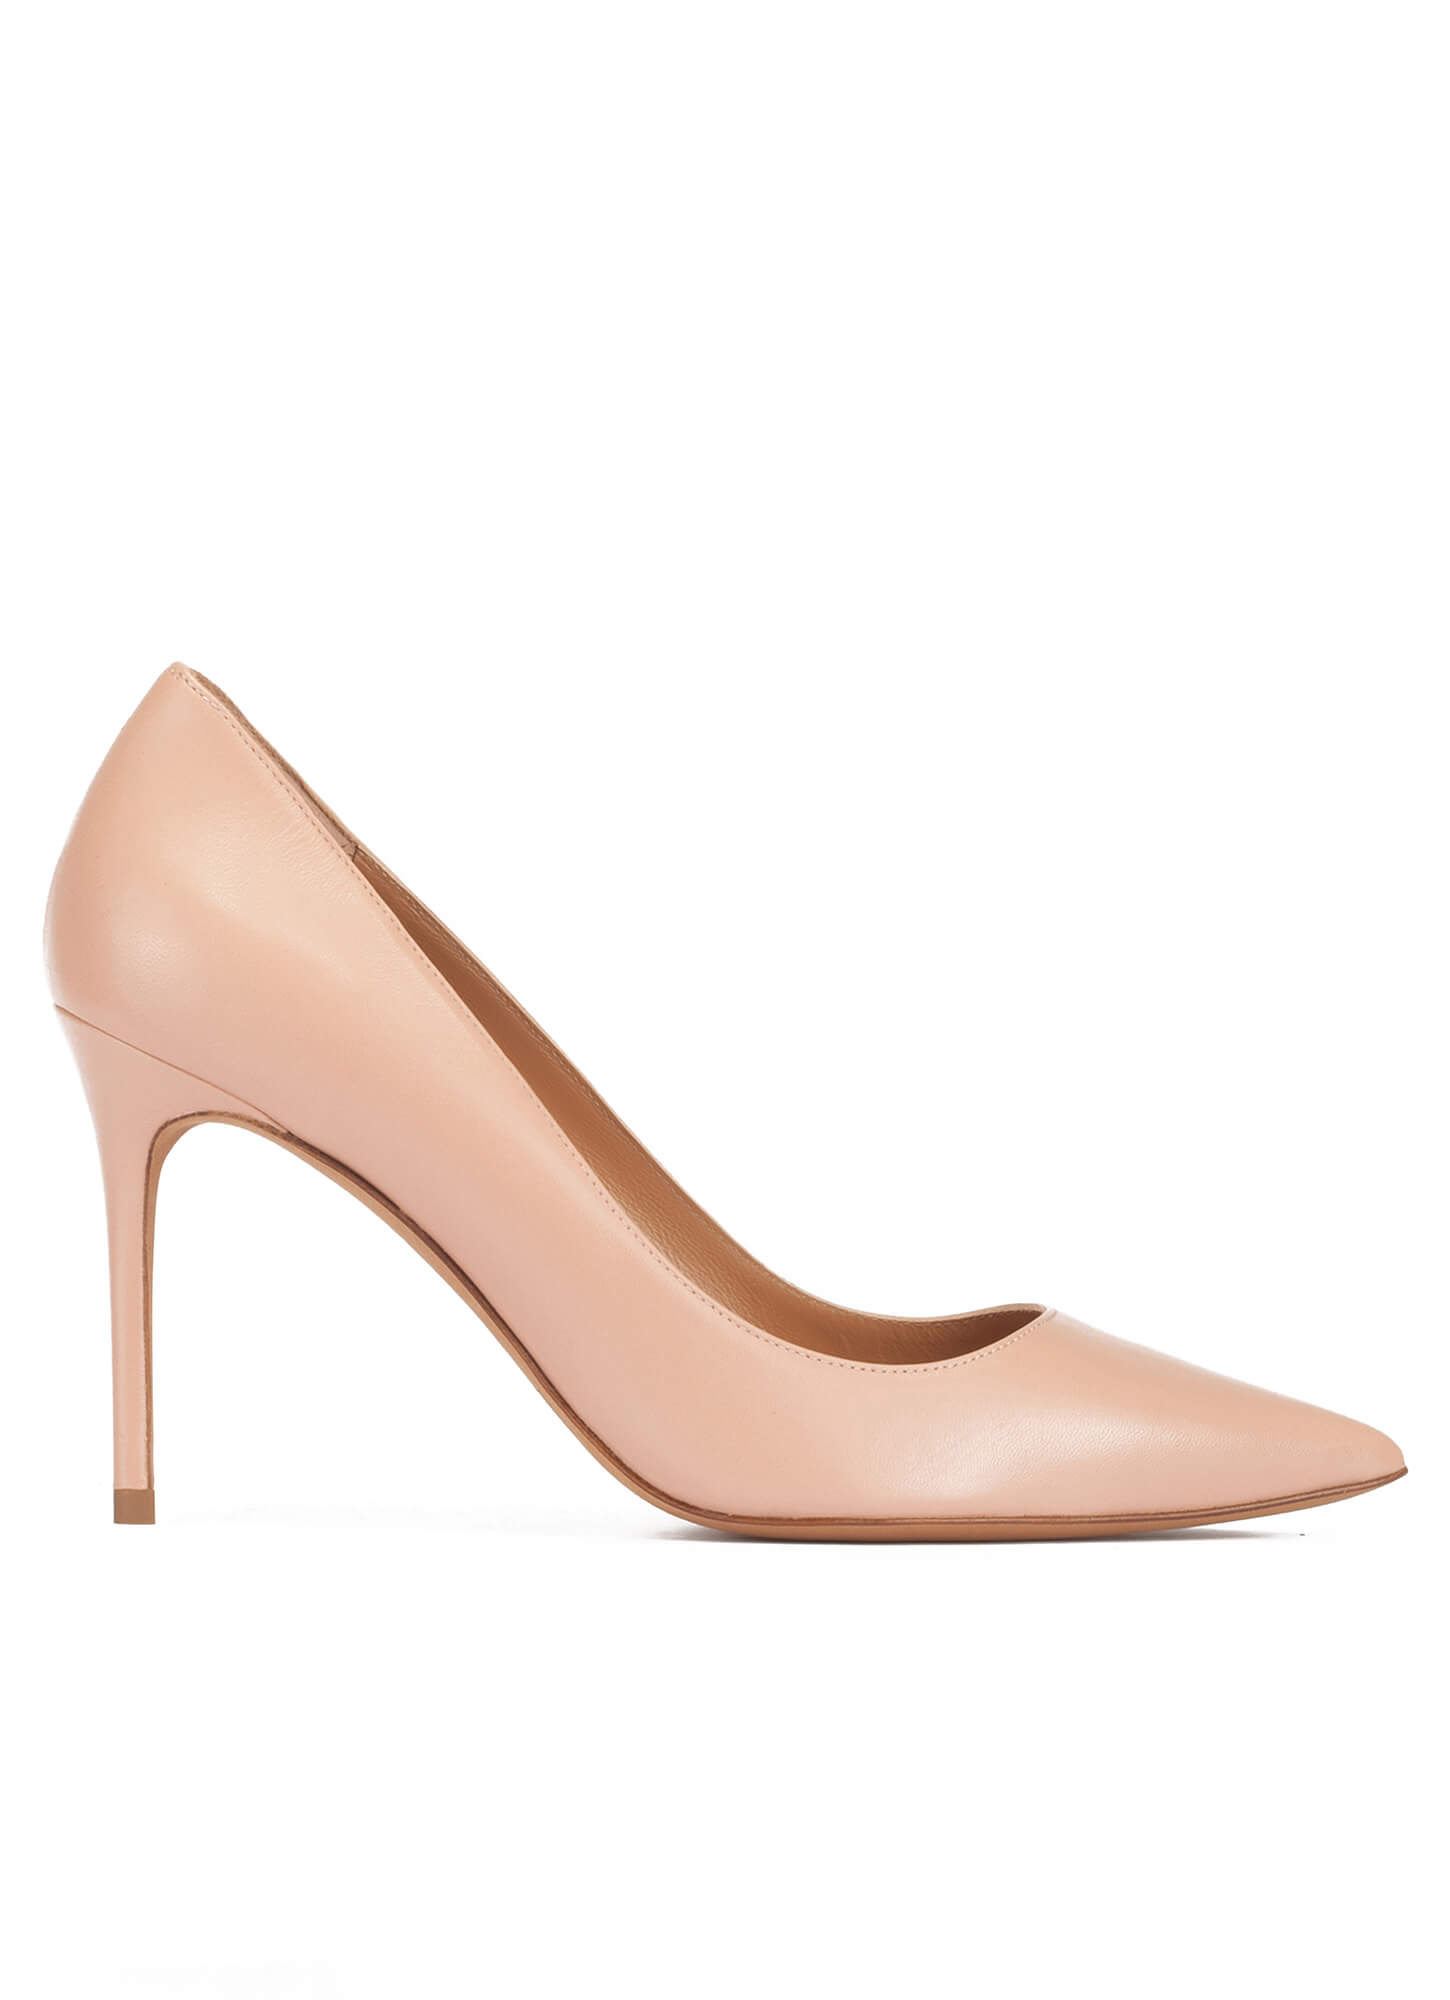 Point-toe high heel pumps nude leather . LOPEZ